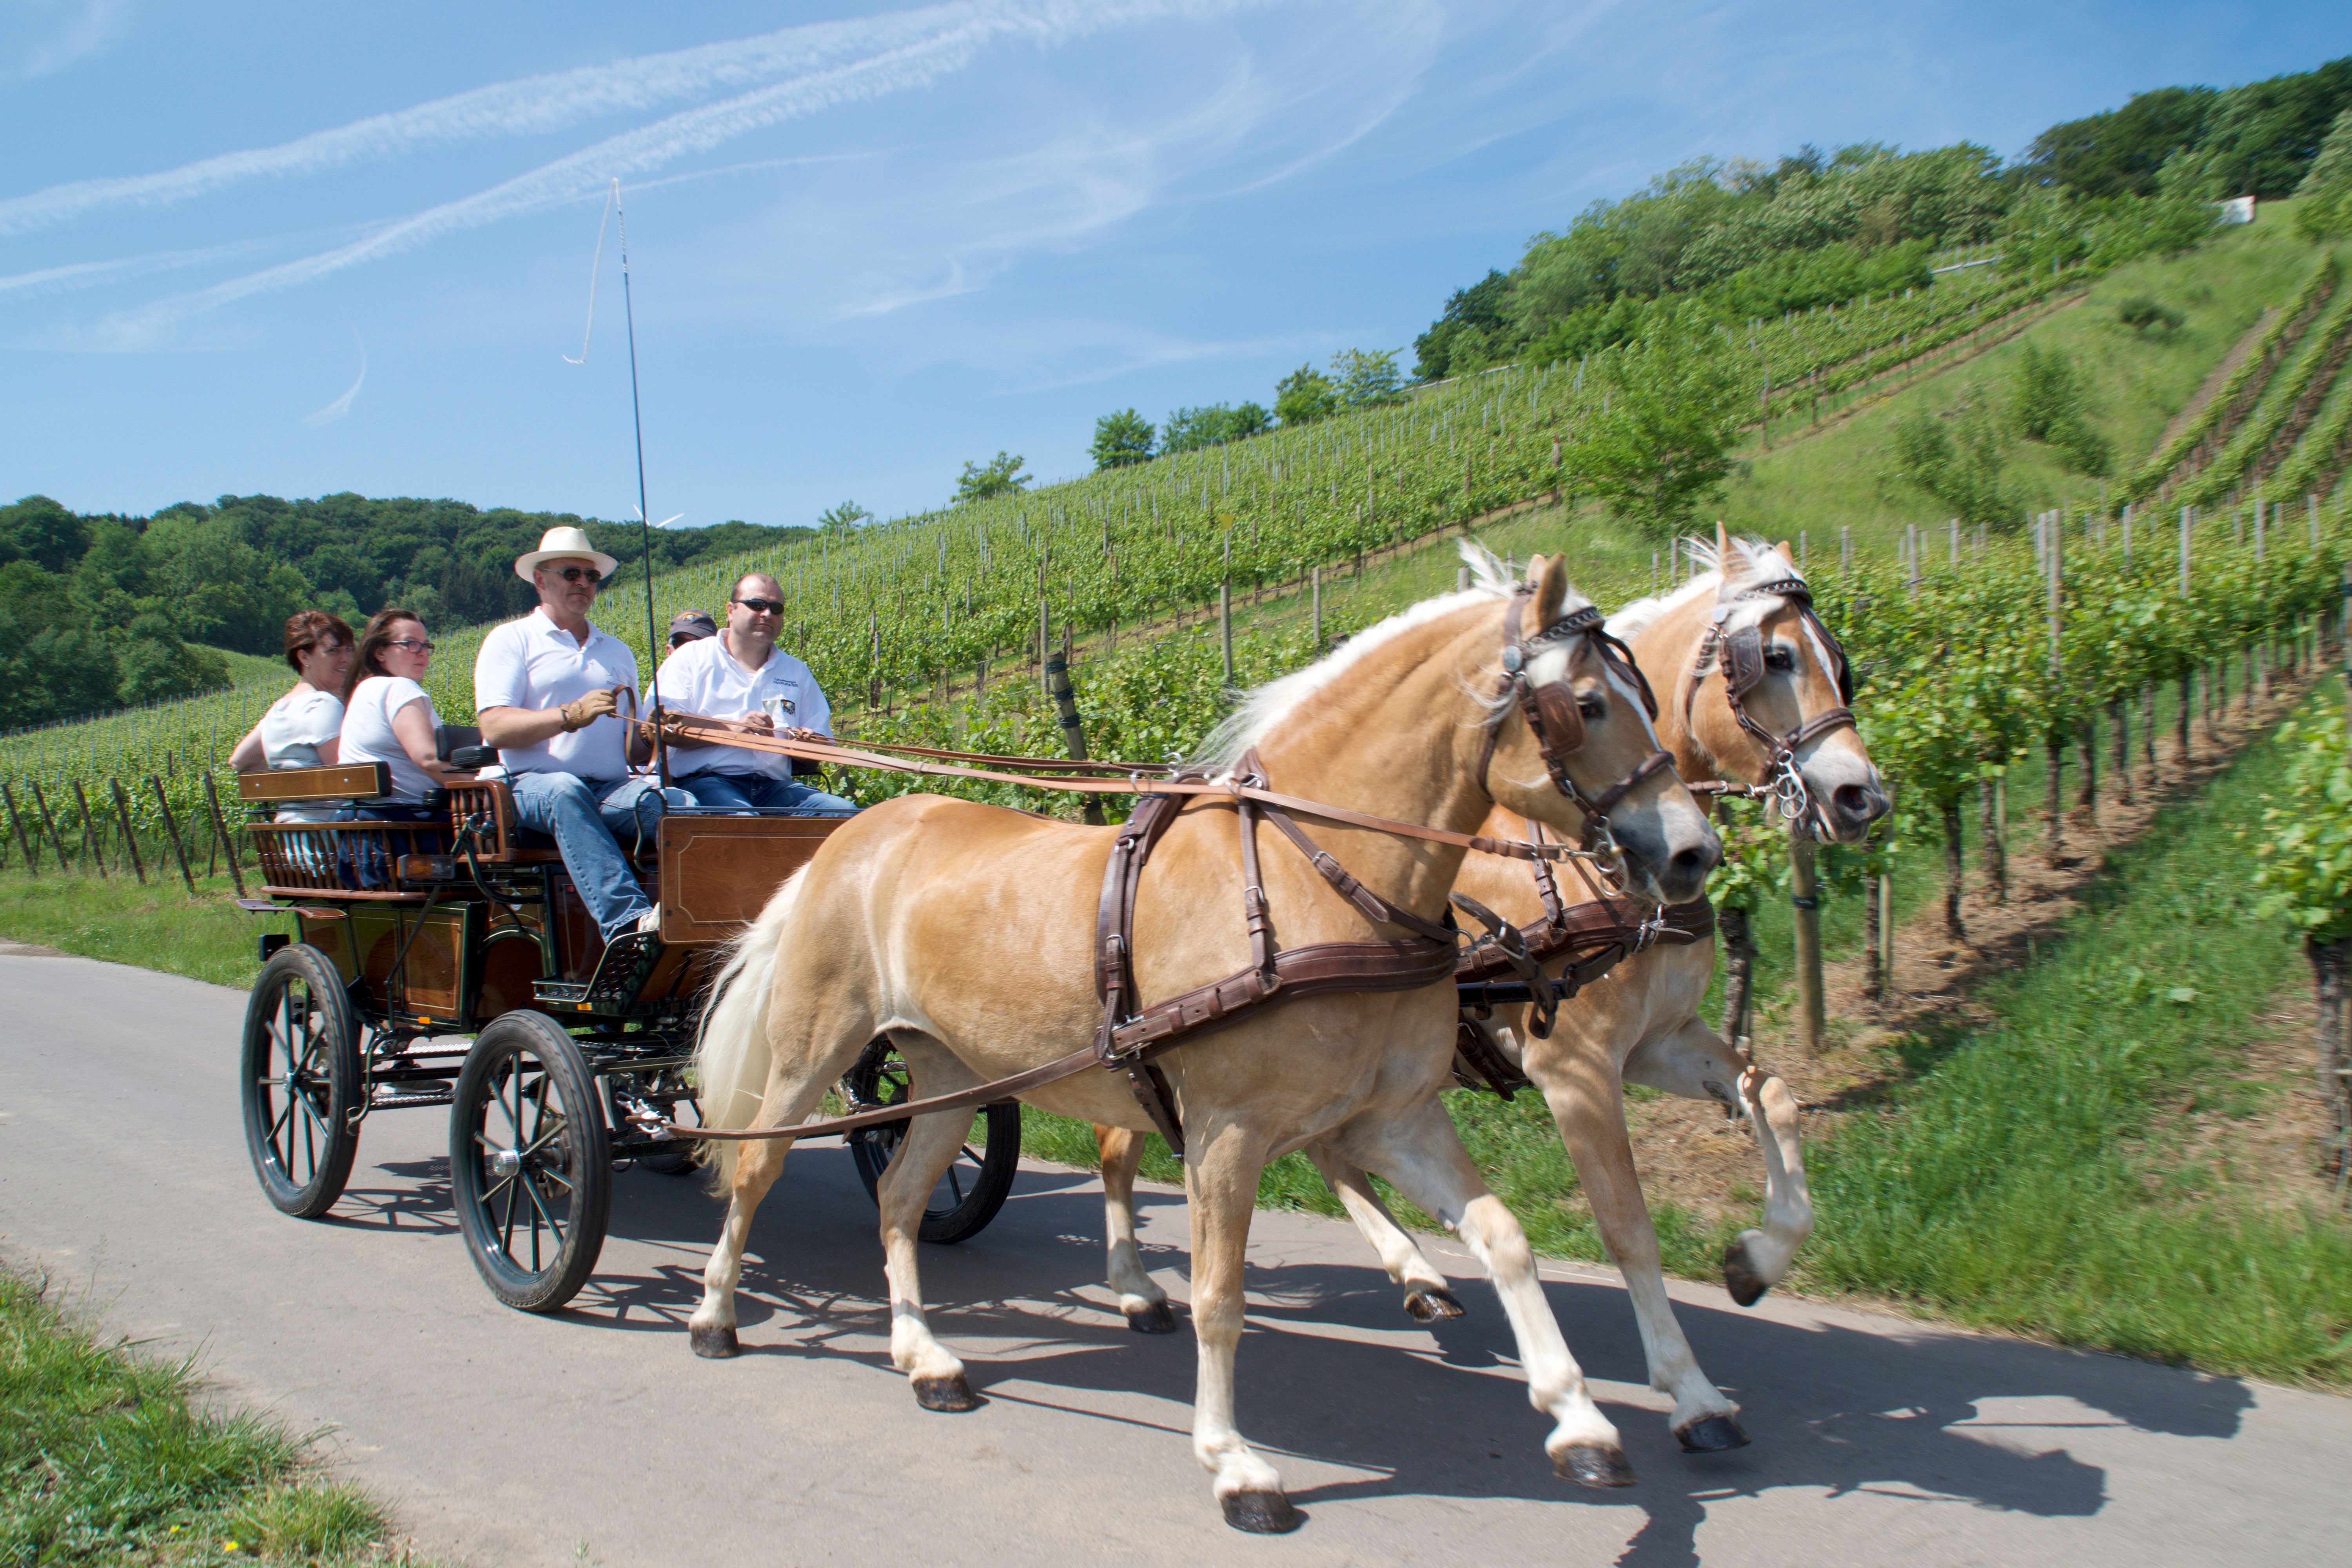 Carriage ride through the vineyards